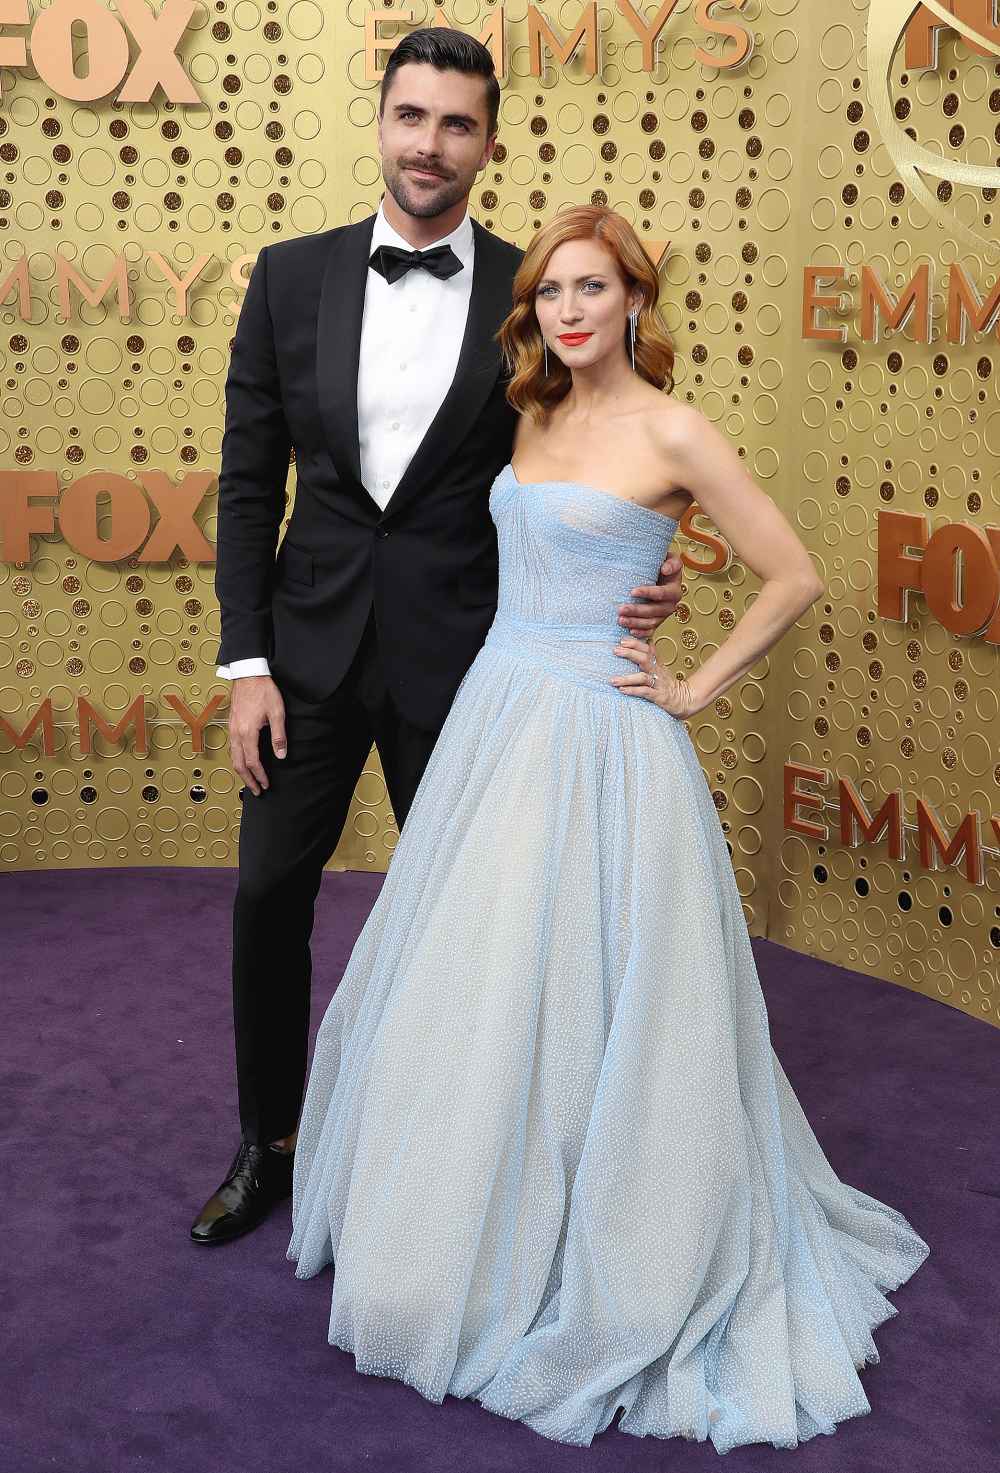 Emmys 2019 Stylish Couples - Brittany Snow and Tyler Stanaland